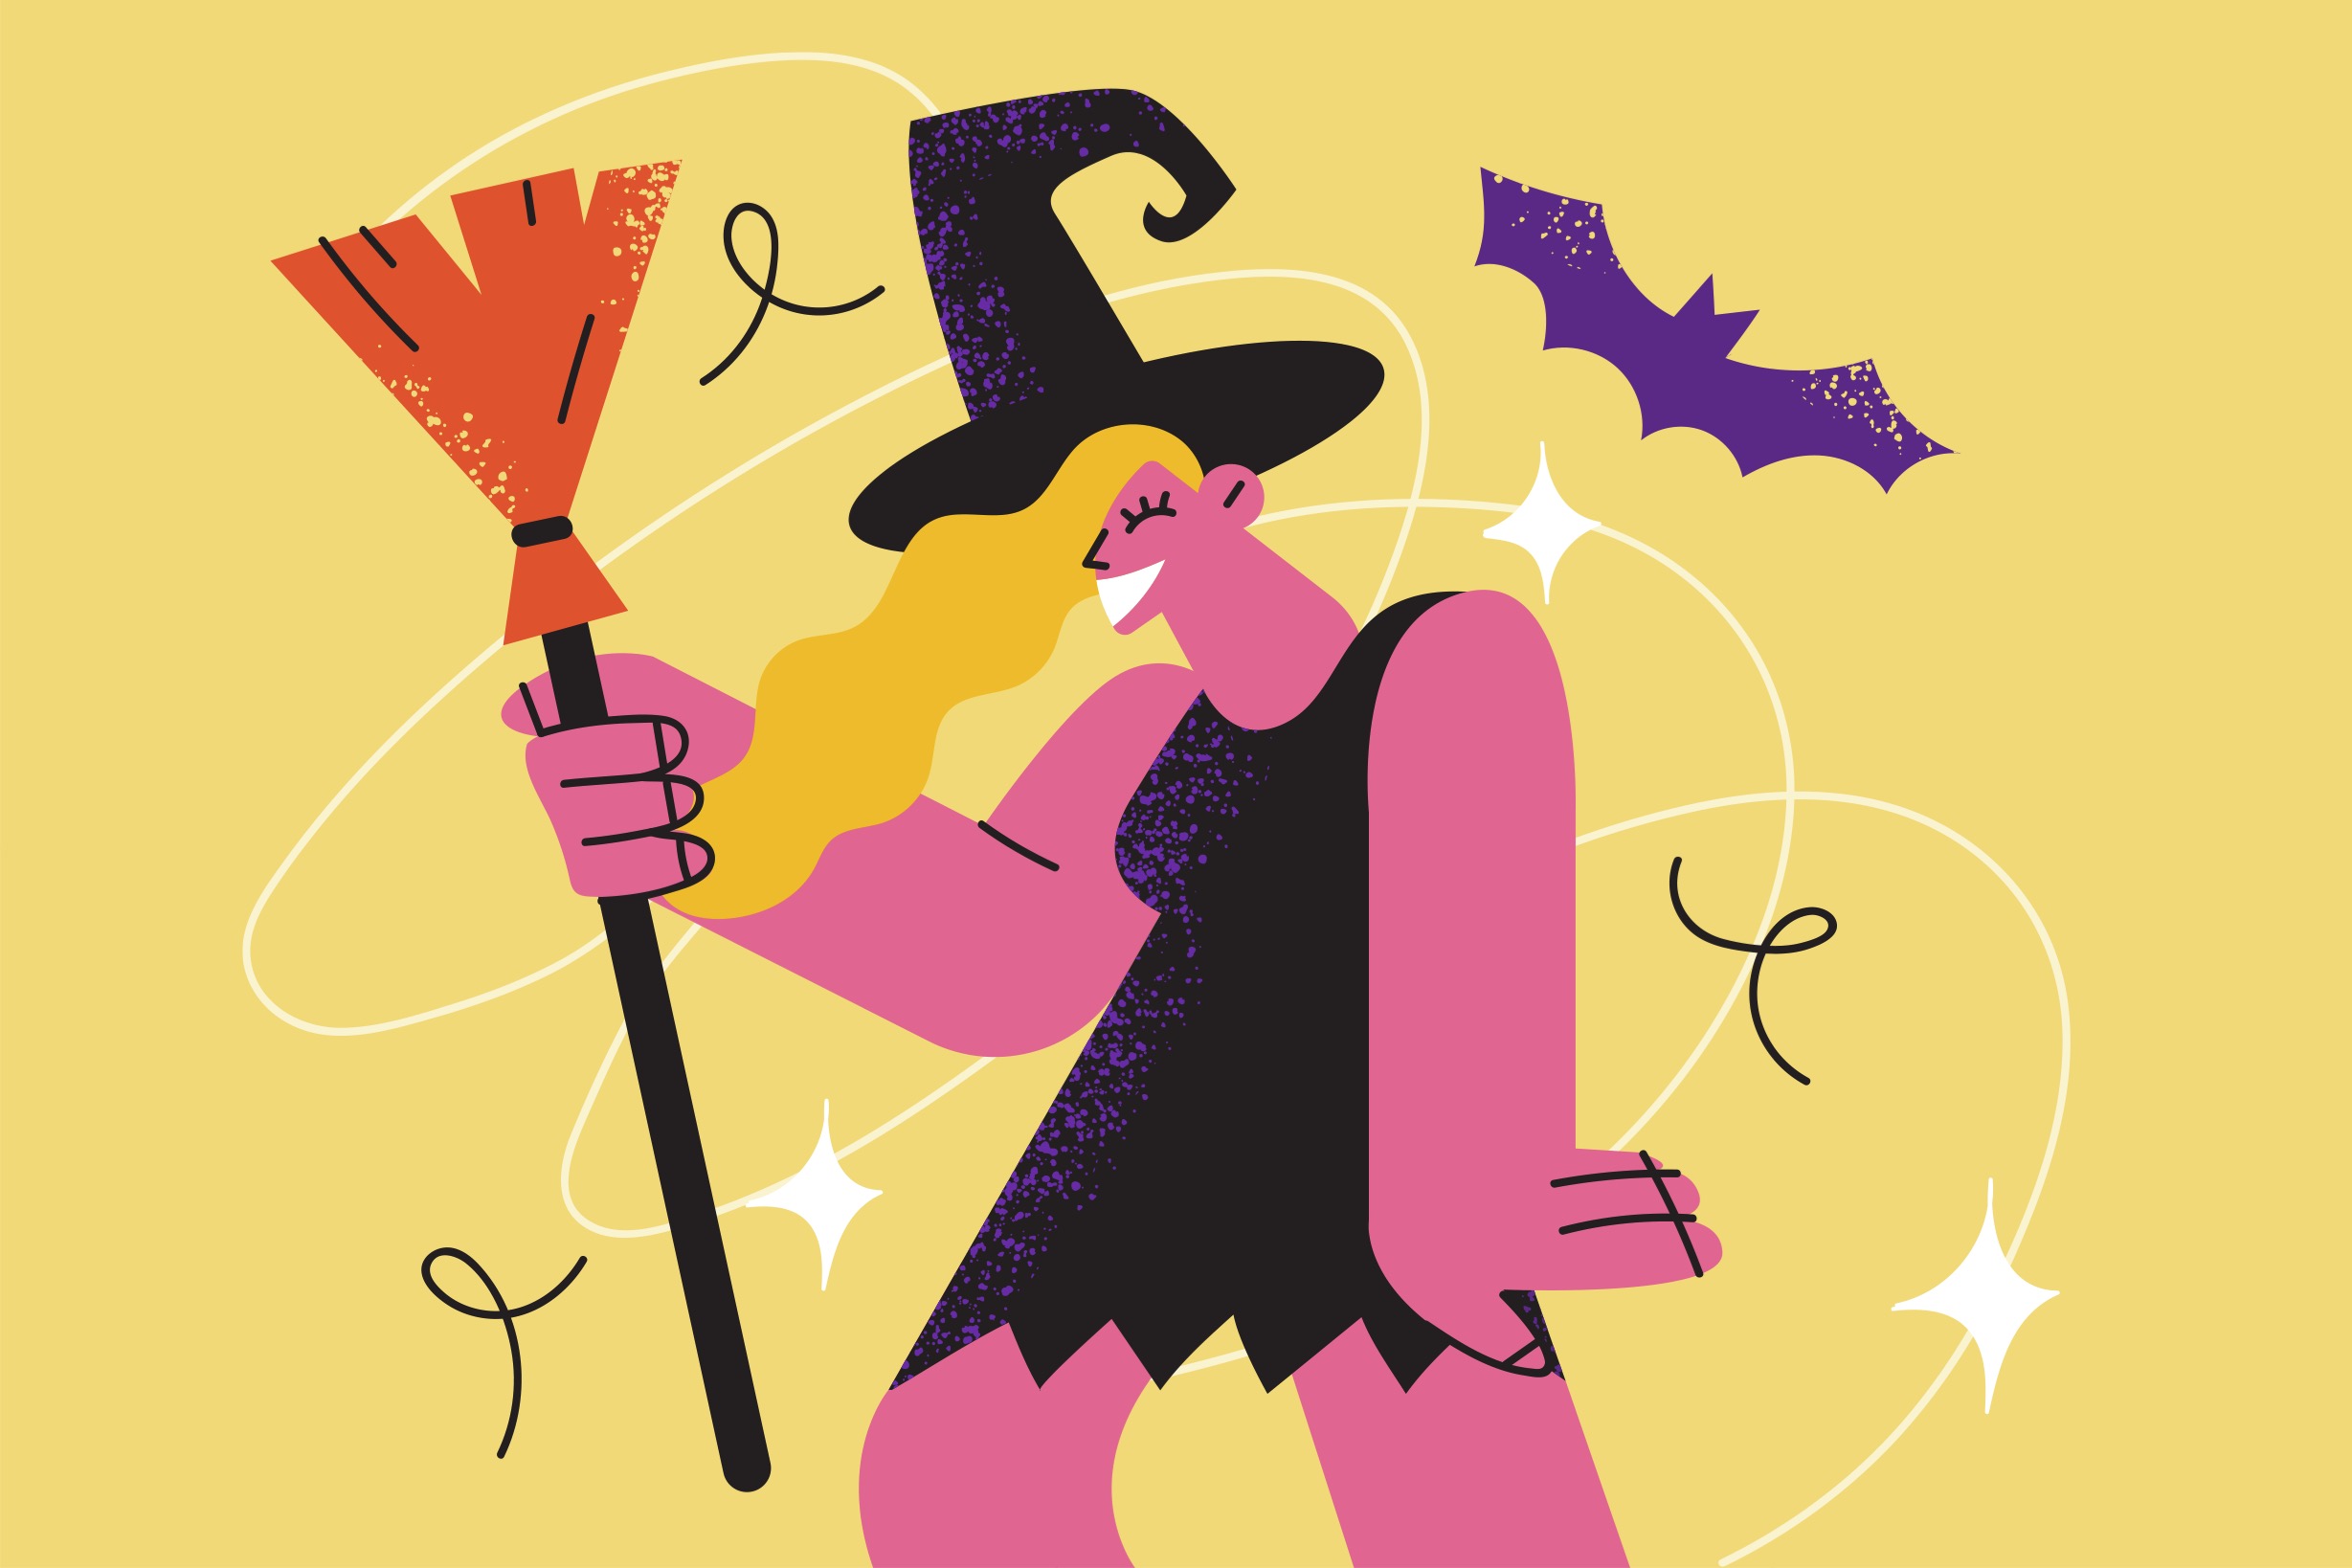 Cartoon of a woman is dressed as a witch for Halloween. She wears a black witch’s hat, a tattered black dress, and holds a broom. A bat flies behind her.